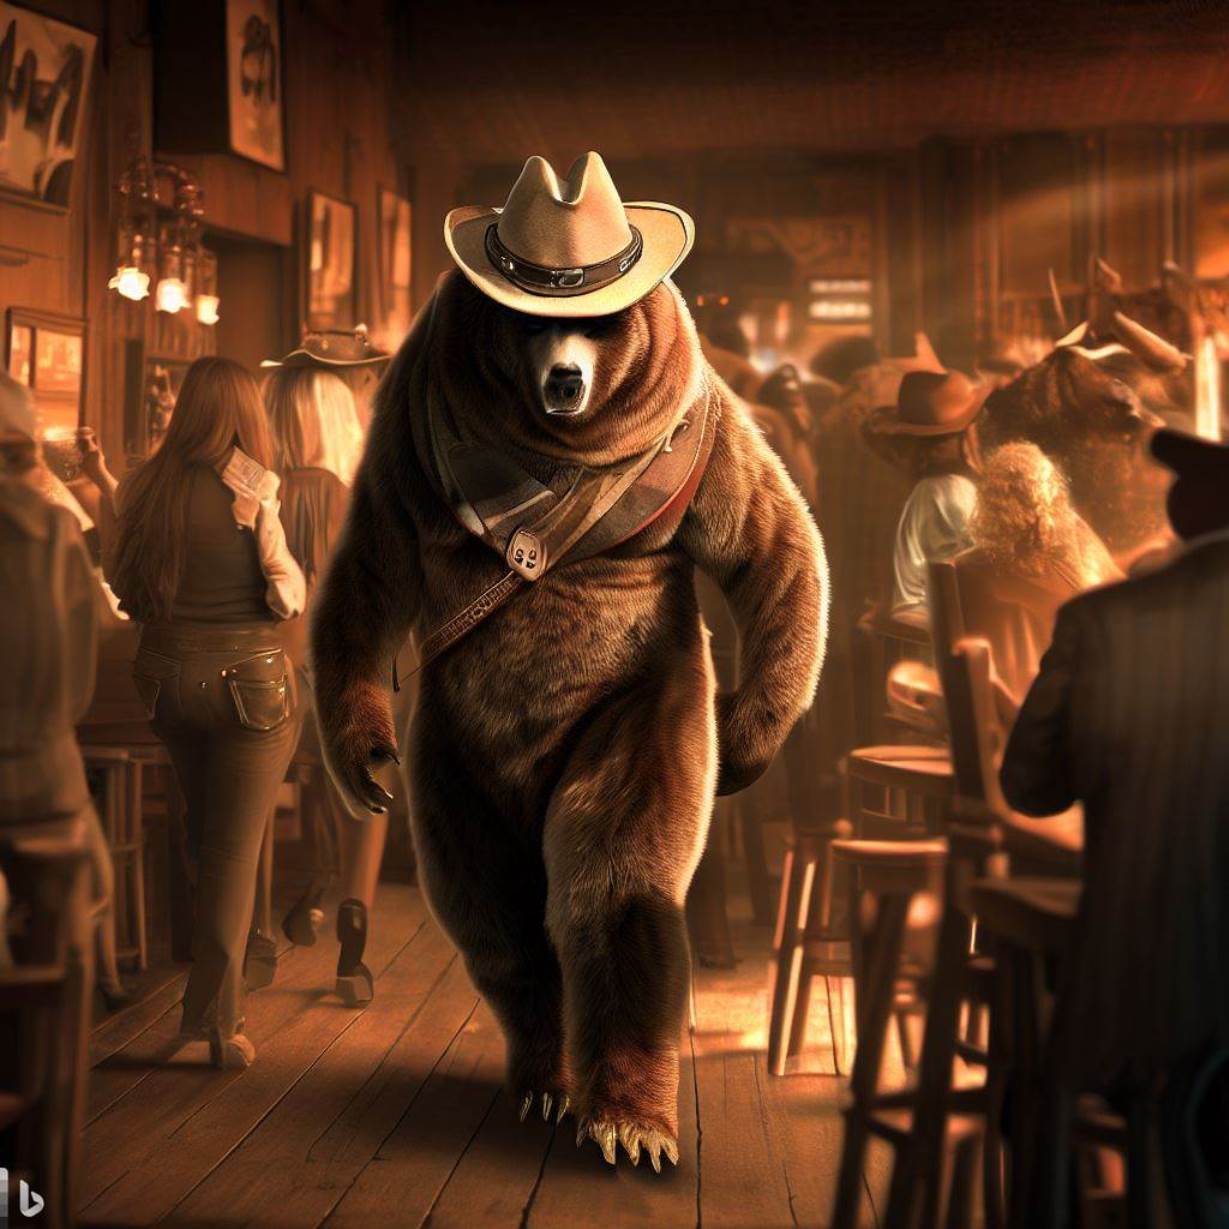 creative image of cowboy bear in wild west